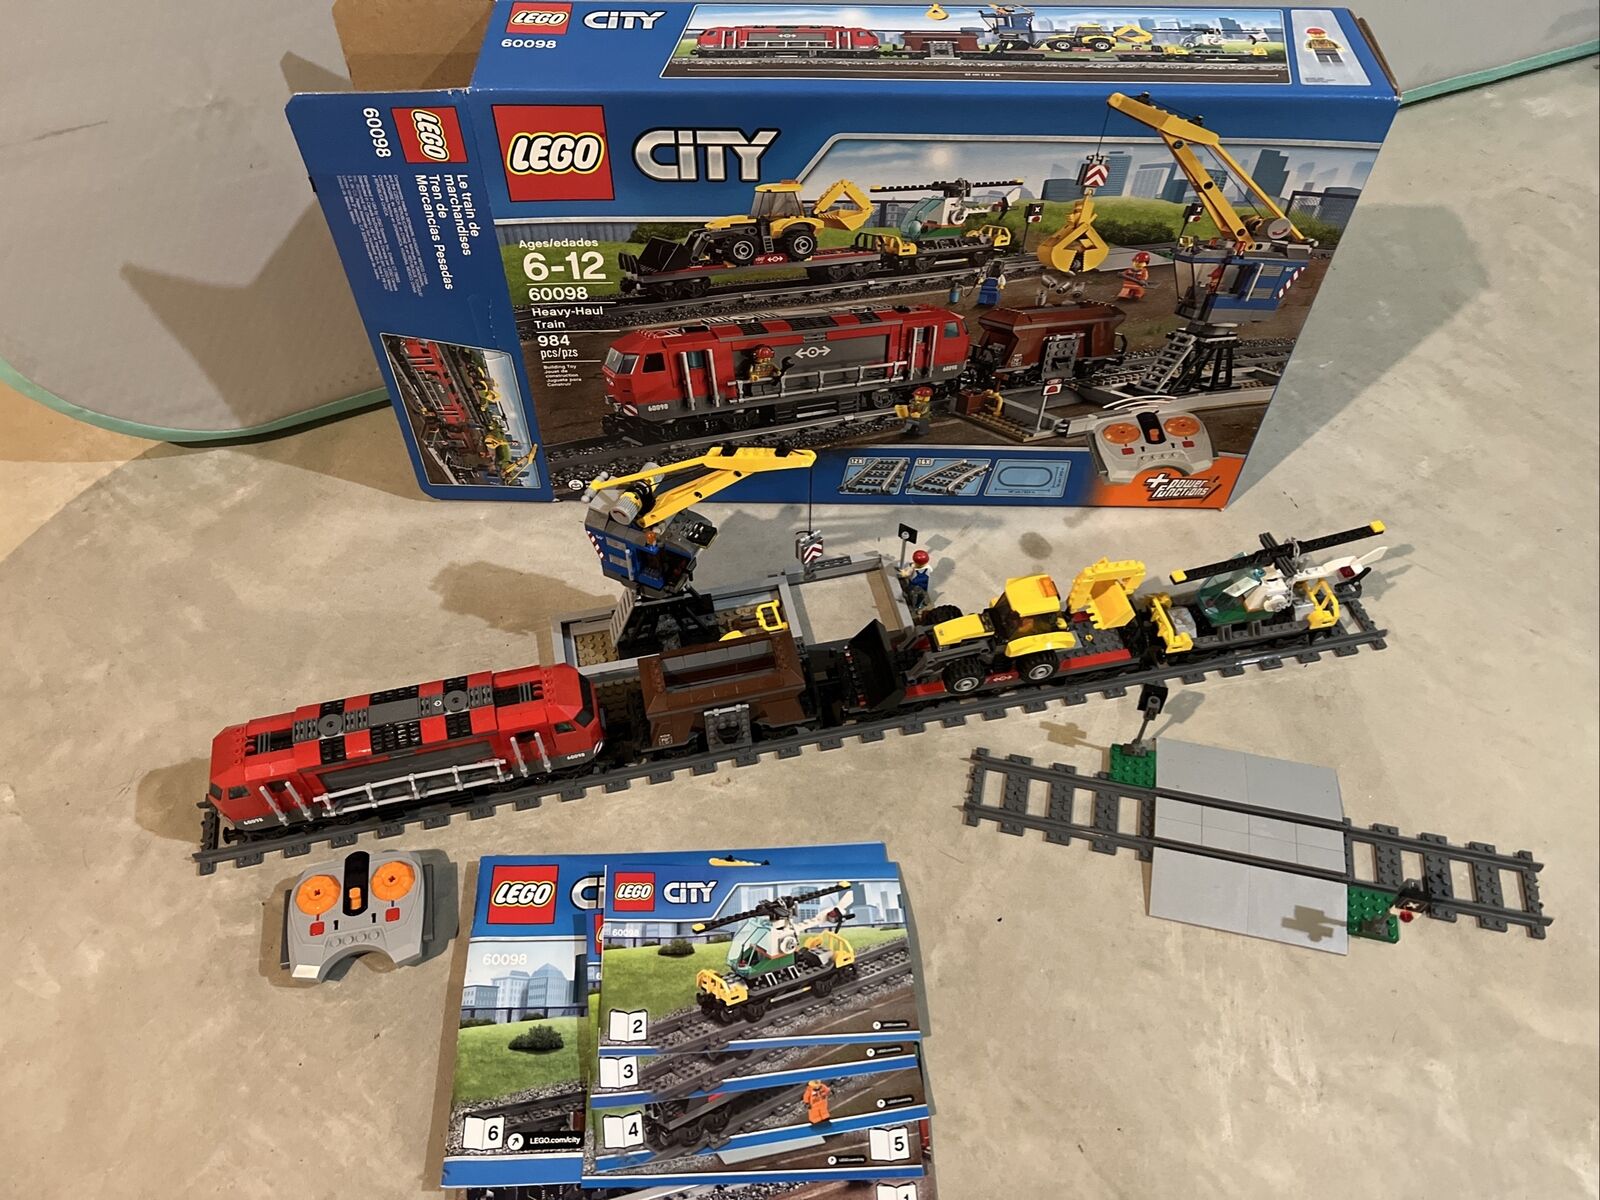 LEGO CITY: Heavy-Haul Train (60098) 100% Complete With Box and Manuals